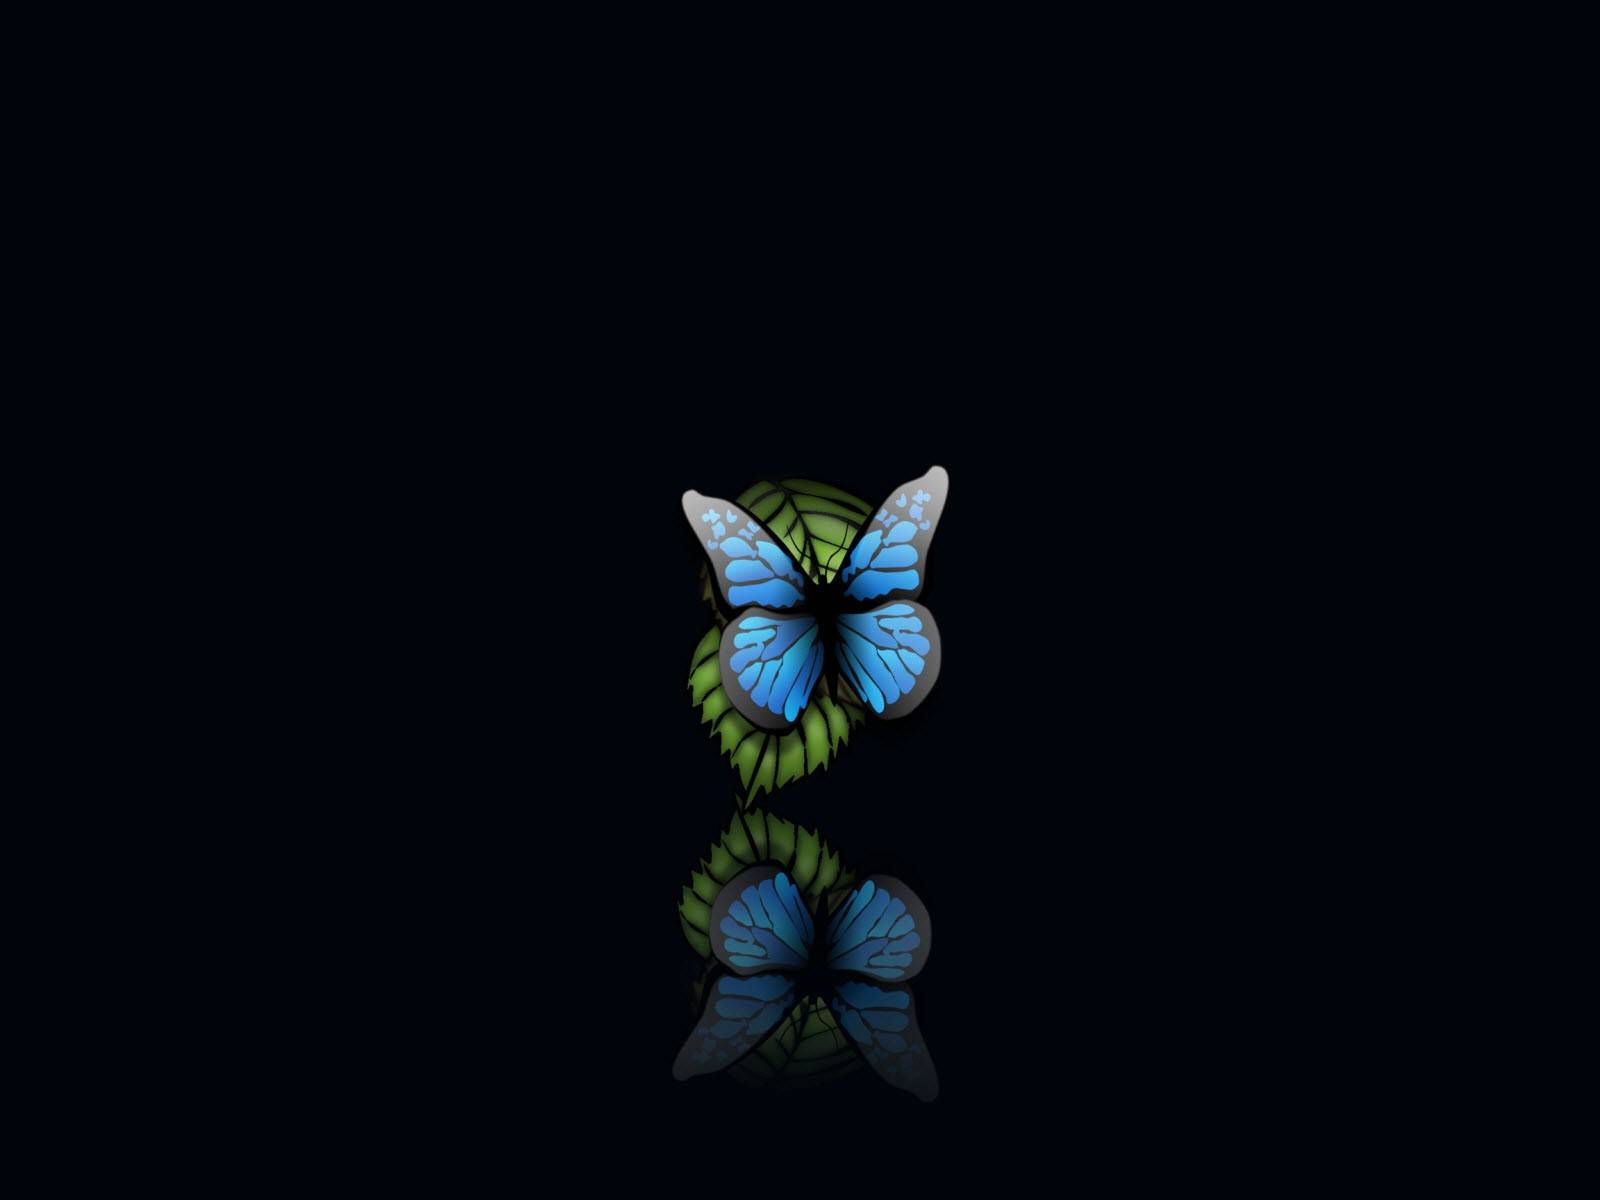 Black Butterfly 1600×1200 Wallpapers 1650402